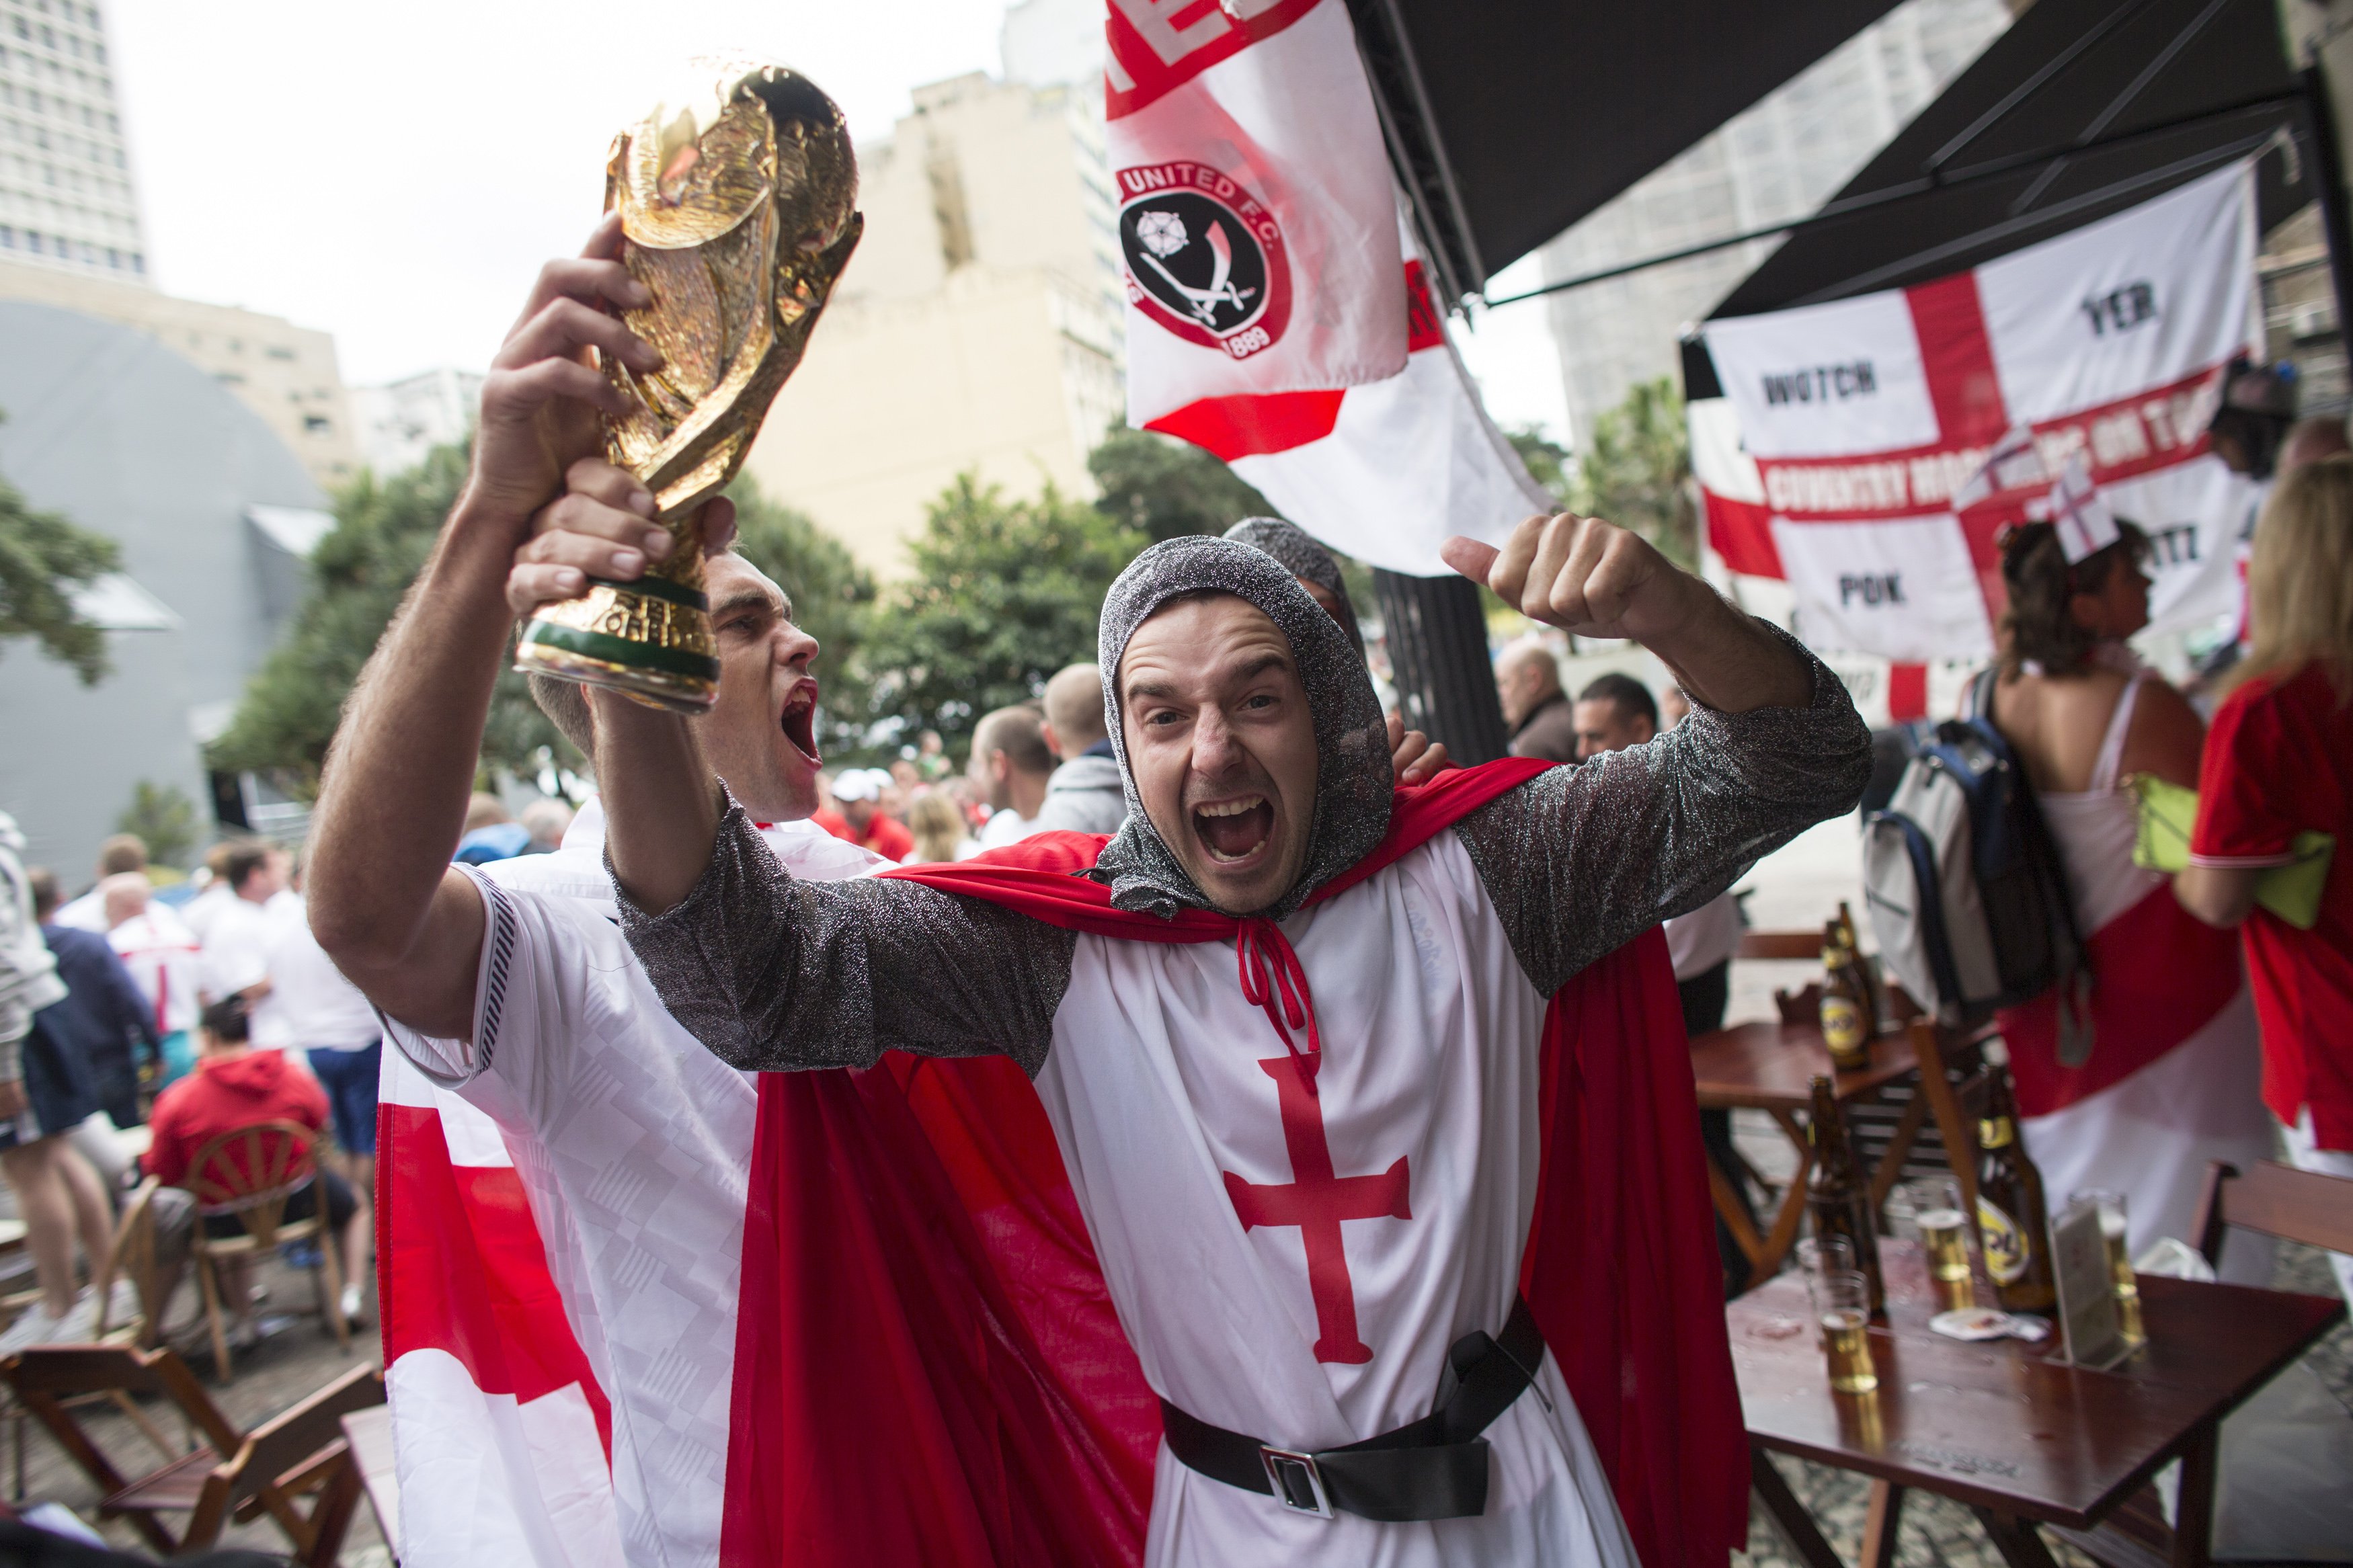 Fans of the England football team gather in a bar ahead of the England's match against Uruguay on June 19, 2014 in Sao Paulo, Brazil.